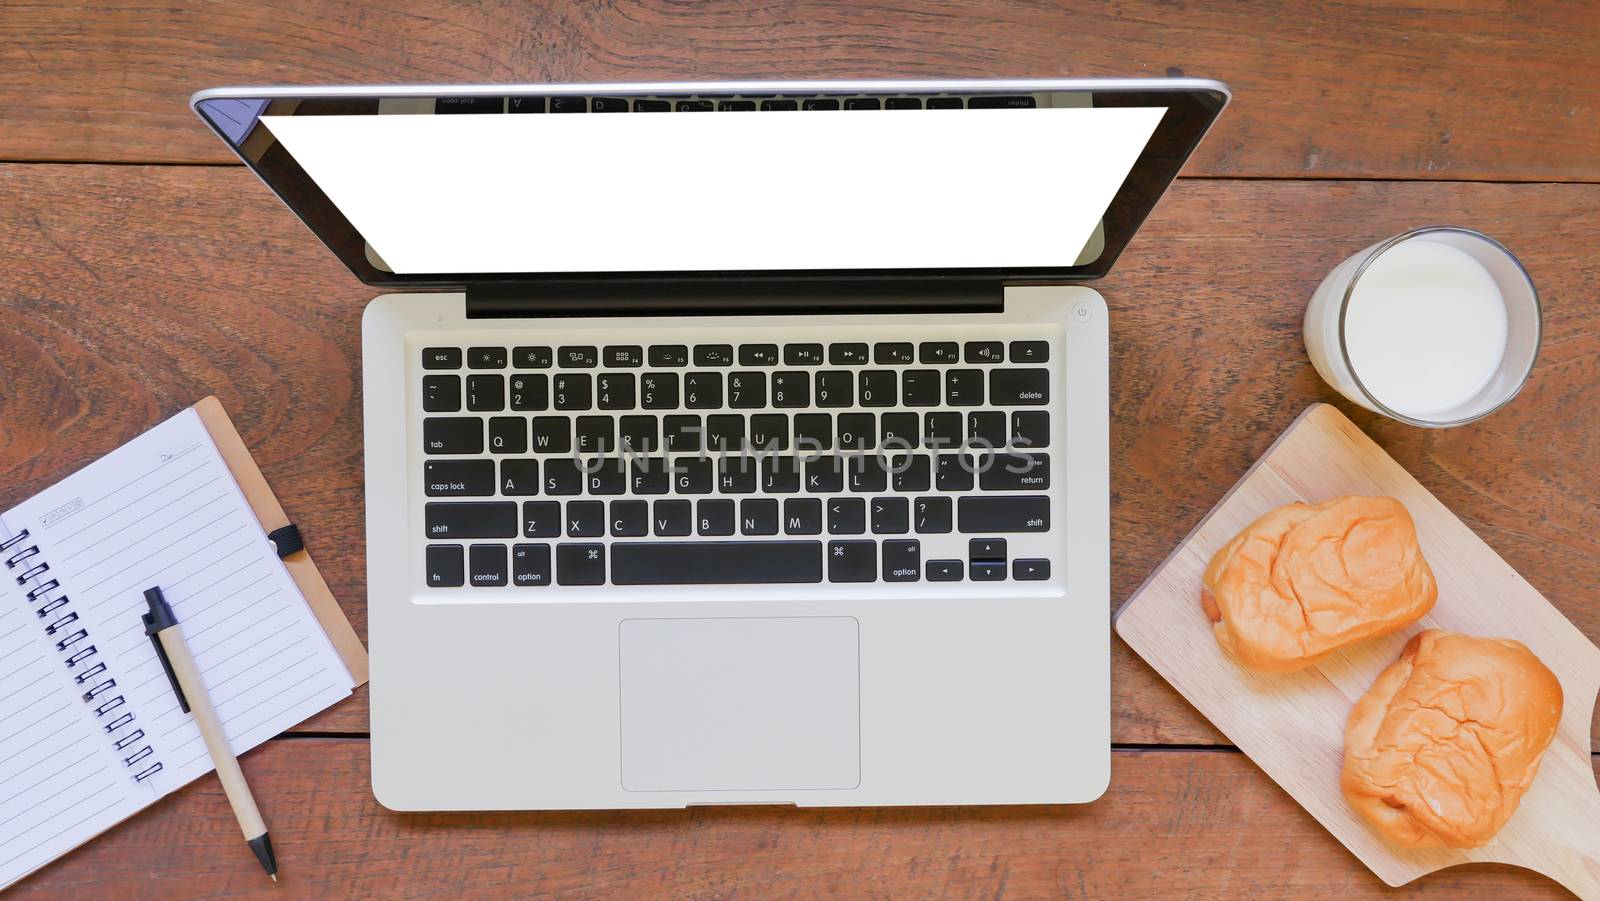 Notebook with labtop,bread and cup of milk on wooden table background.